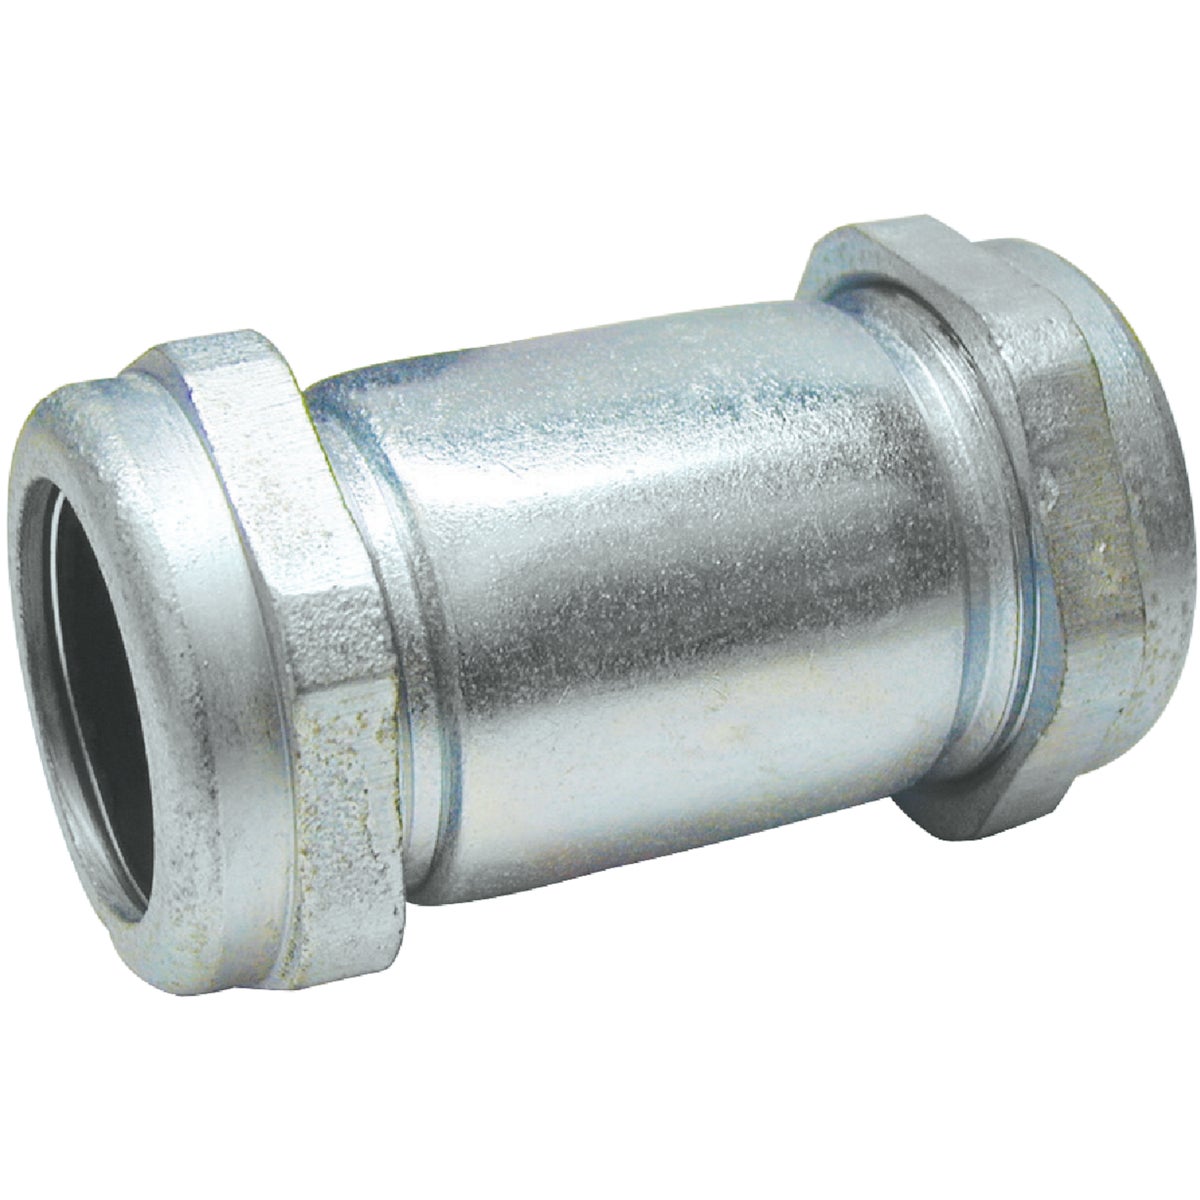 1-1/2X5 GALV COUPLING